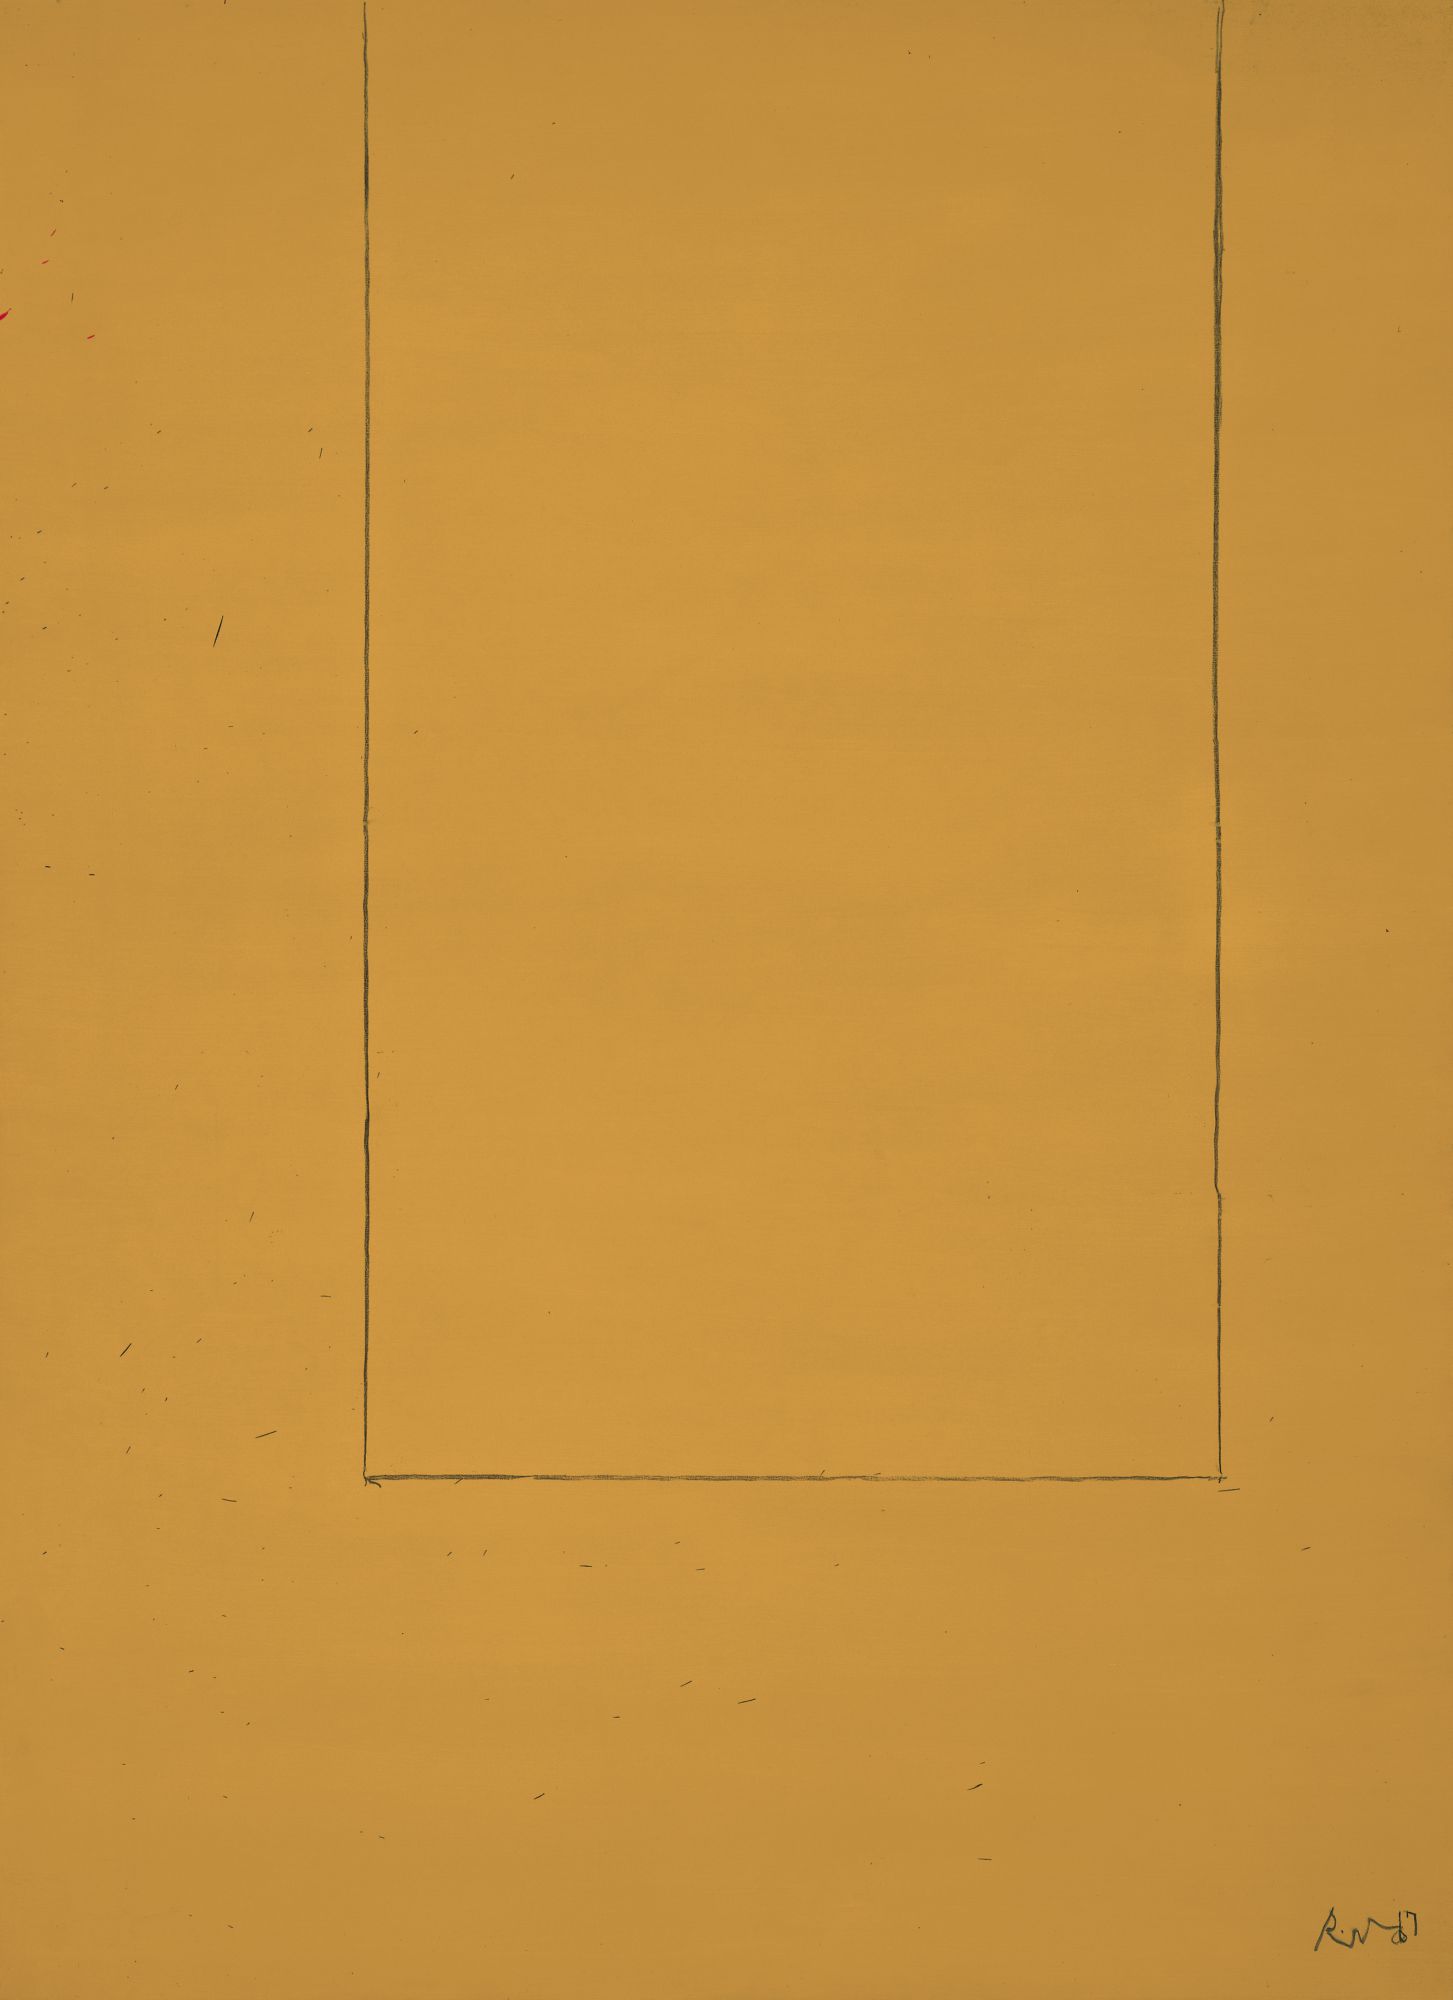 Open No. 1: In Yellow Ochre, 1967, acrylic and charcoal on canvas, 114 ✕ 84 in. (289.6 ✕ 213.4 cm)